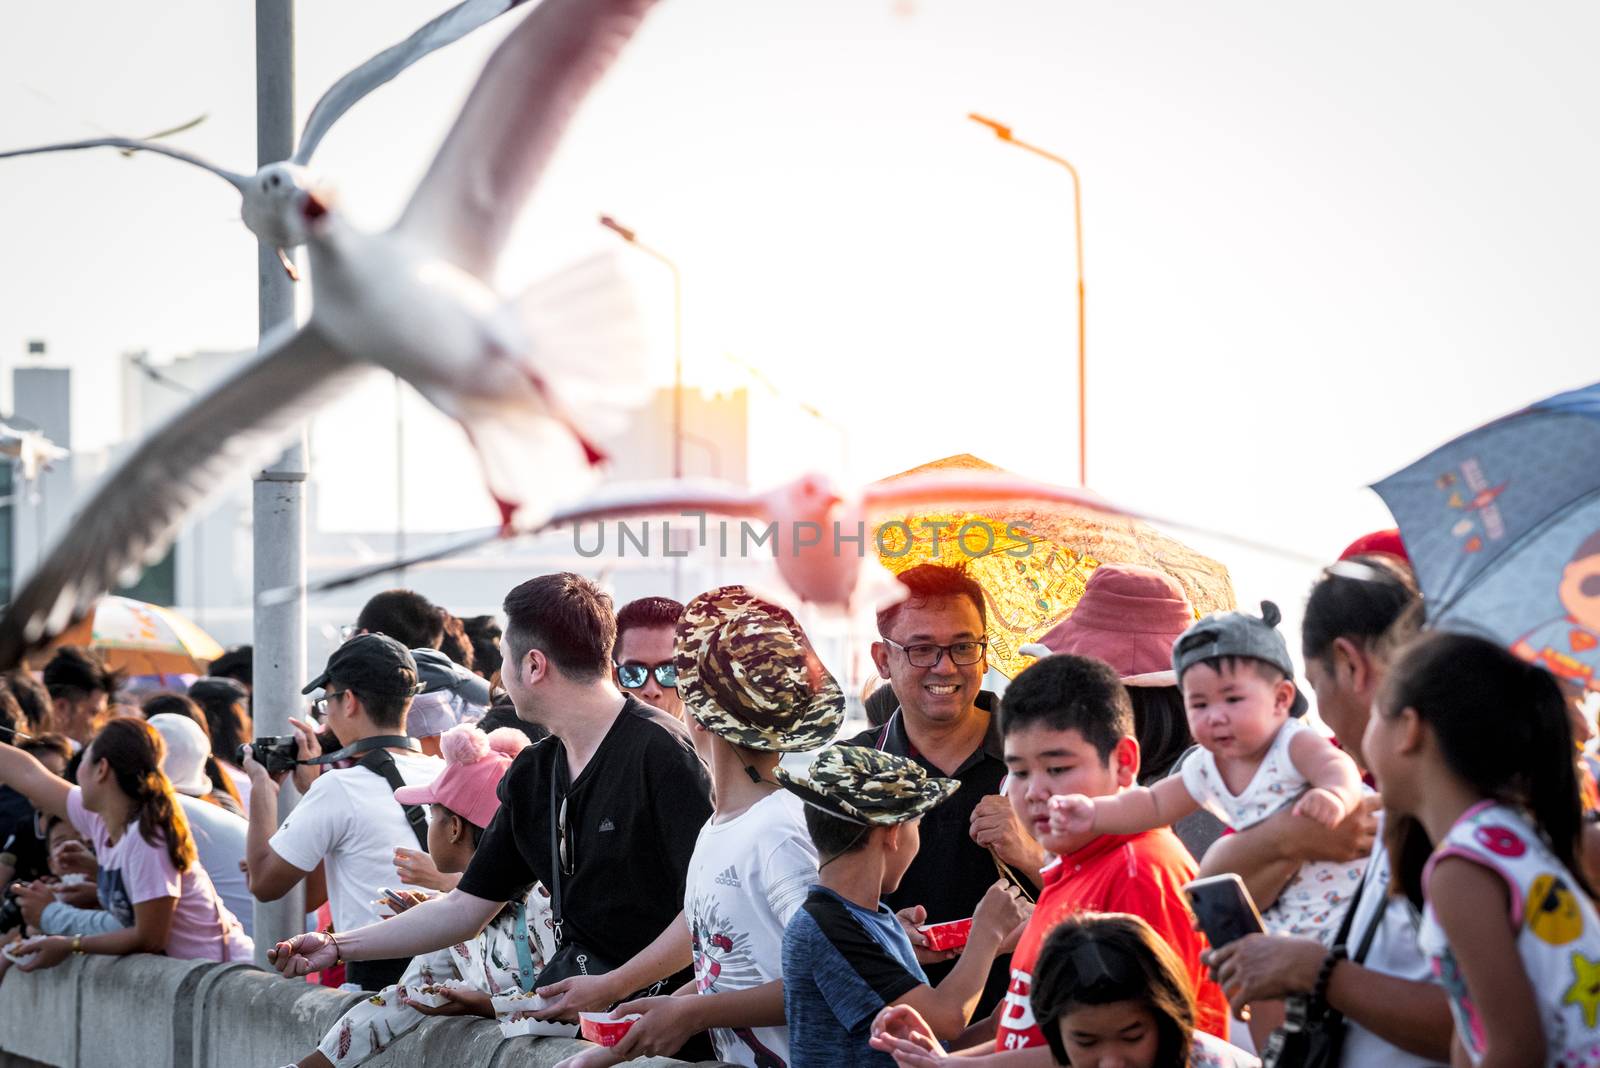 Samut Prakarn, Thailand - December 29, 2019 : Bang Pu provides habitat for large flocks of migratory seagulls annually in the early winter visitors can enjoy with feeding thousands of seagulls